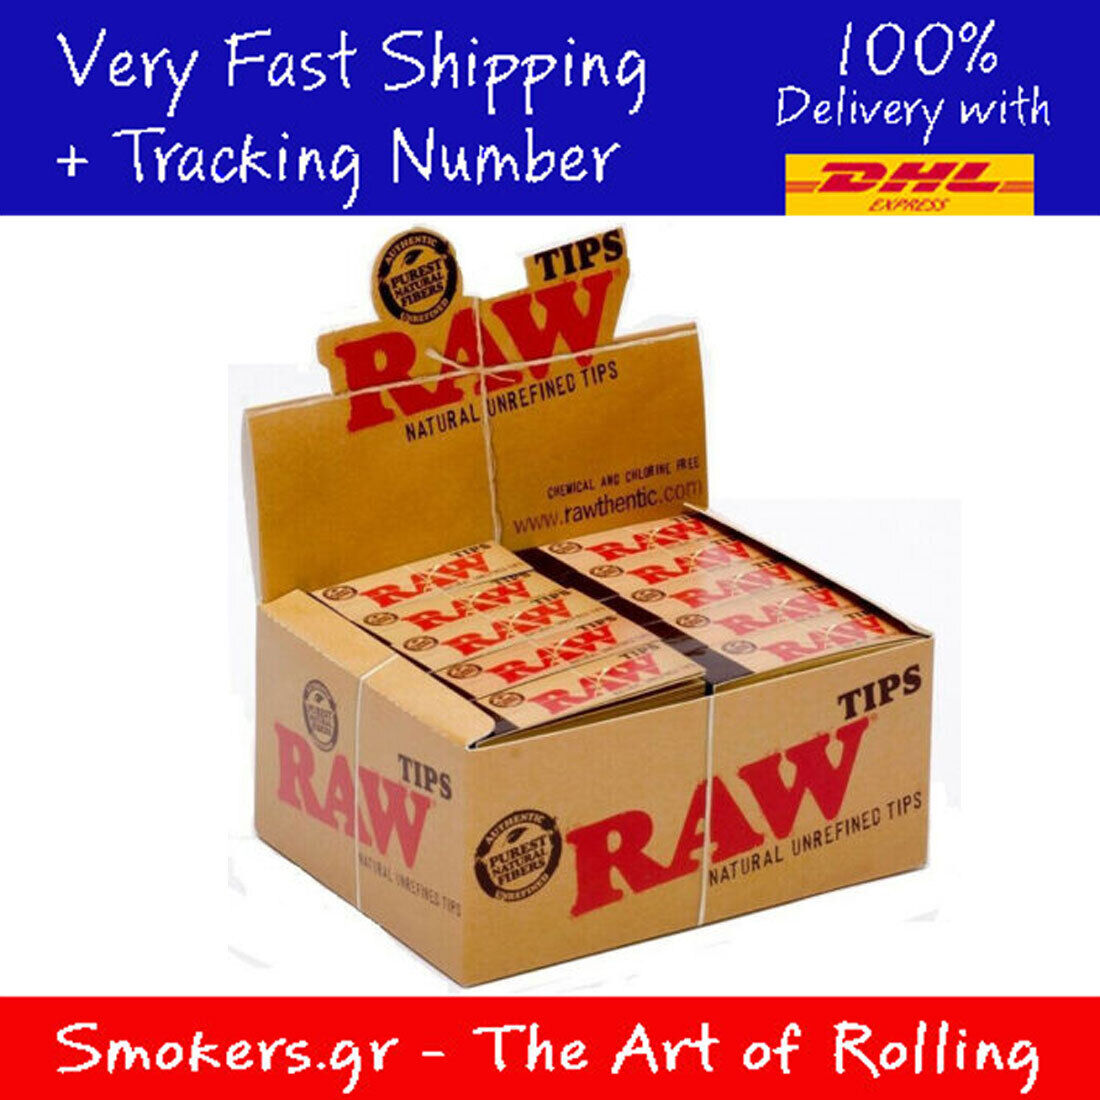 1x Box Raw Rolling Paper Filter Tips Natural Unrefined (box of 50 packs )